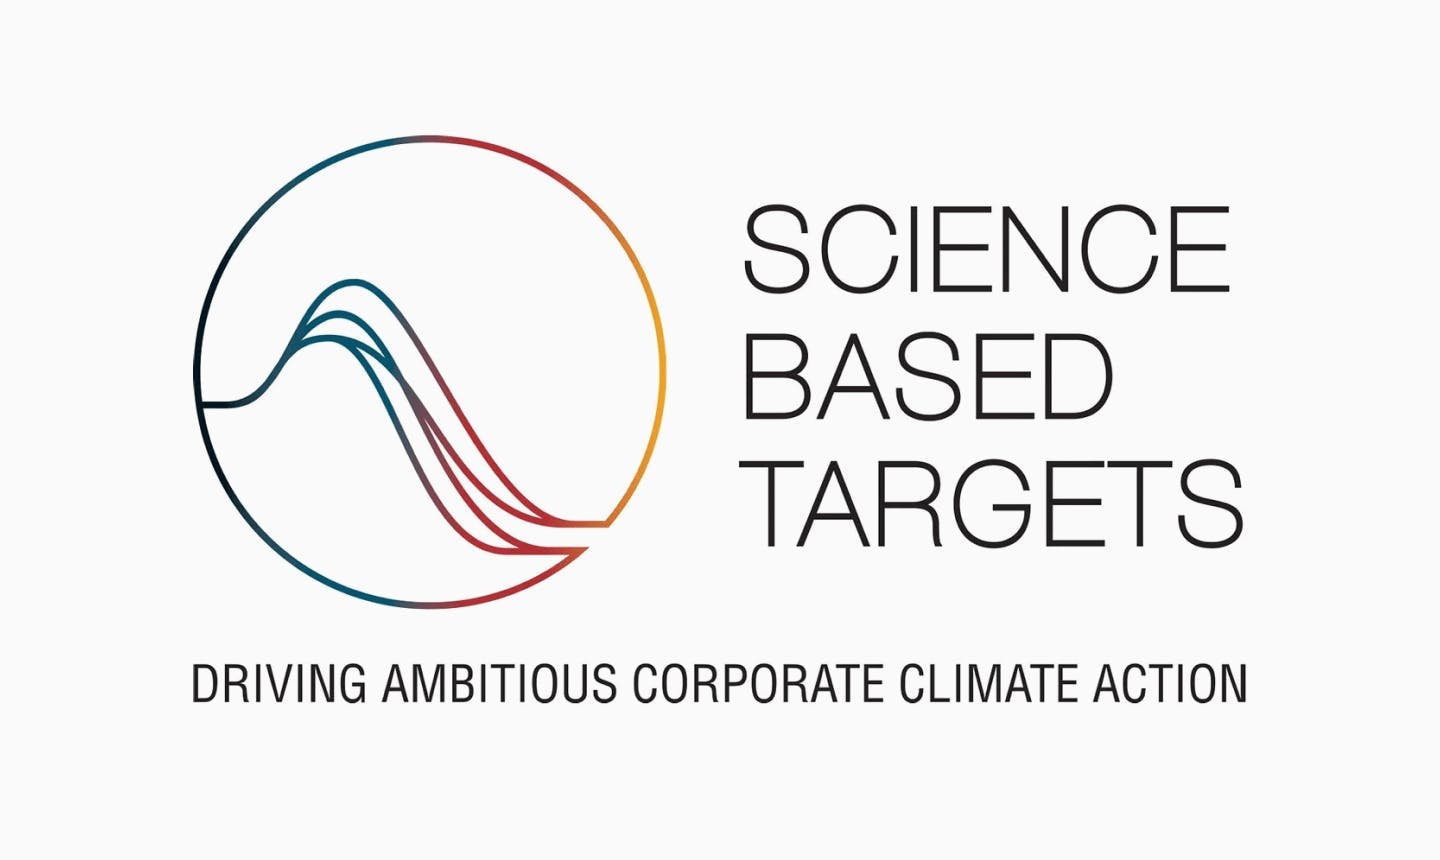 Science Based Targets: driving ambitious corporate climate action